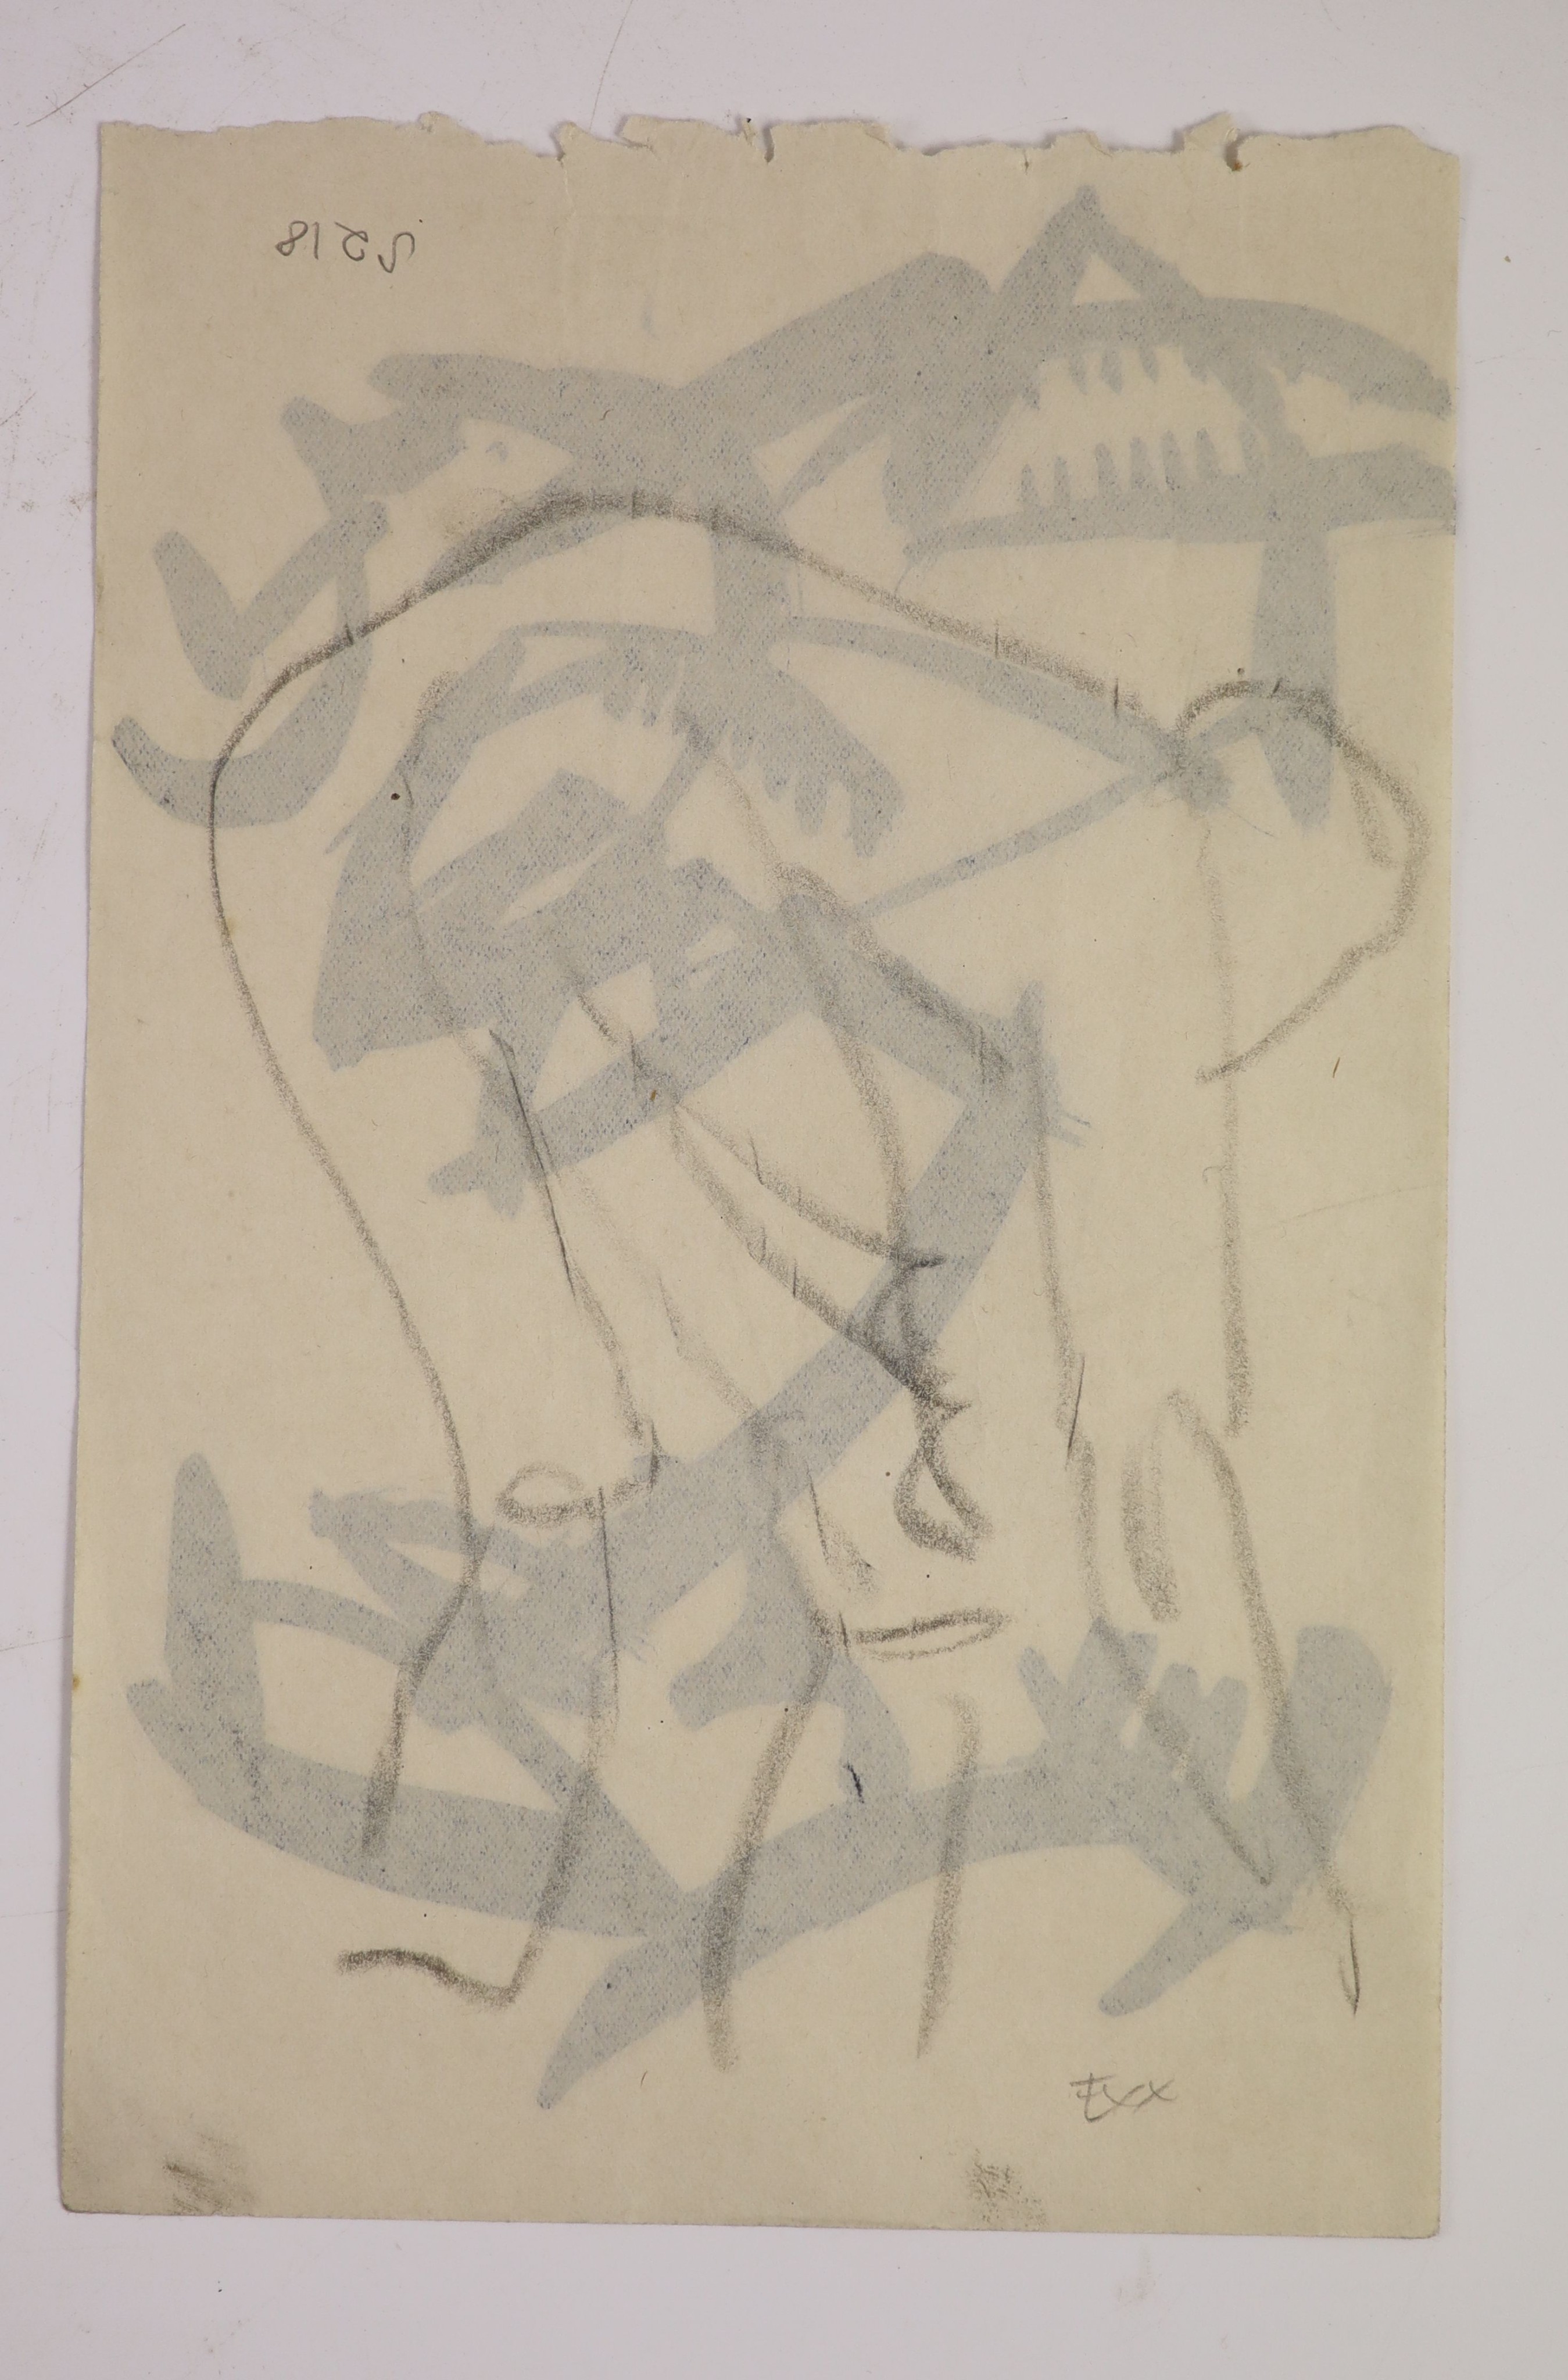 Henri Gaudier-Brzeska (1891-1915), Henri Stooping male figure, an abstract sketch to verso, in black ink, charcoal on paper, 14 x 21cms, unframed